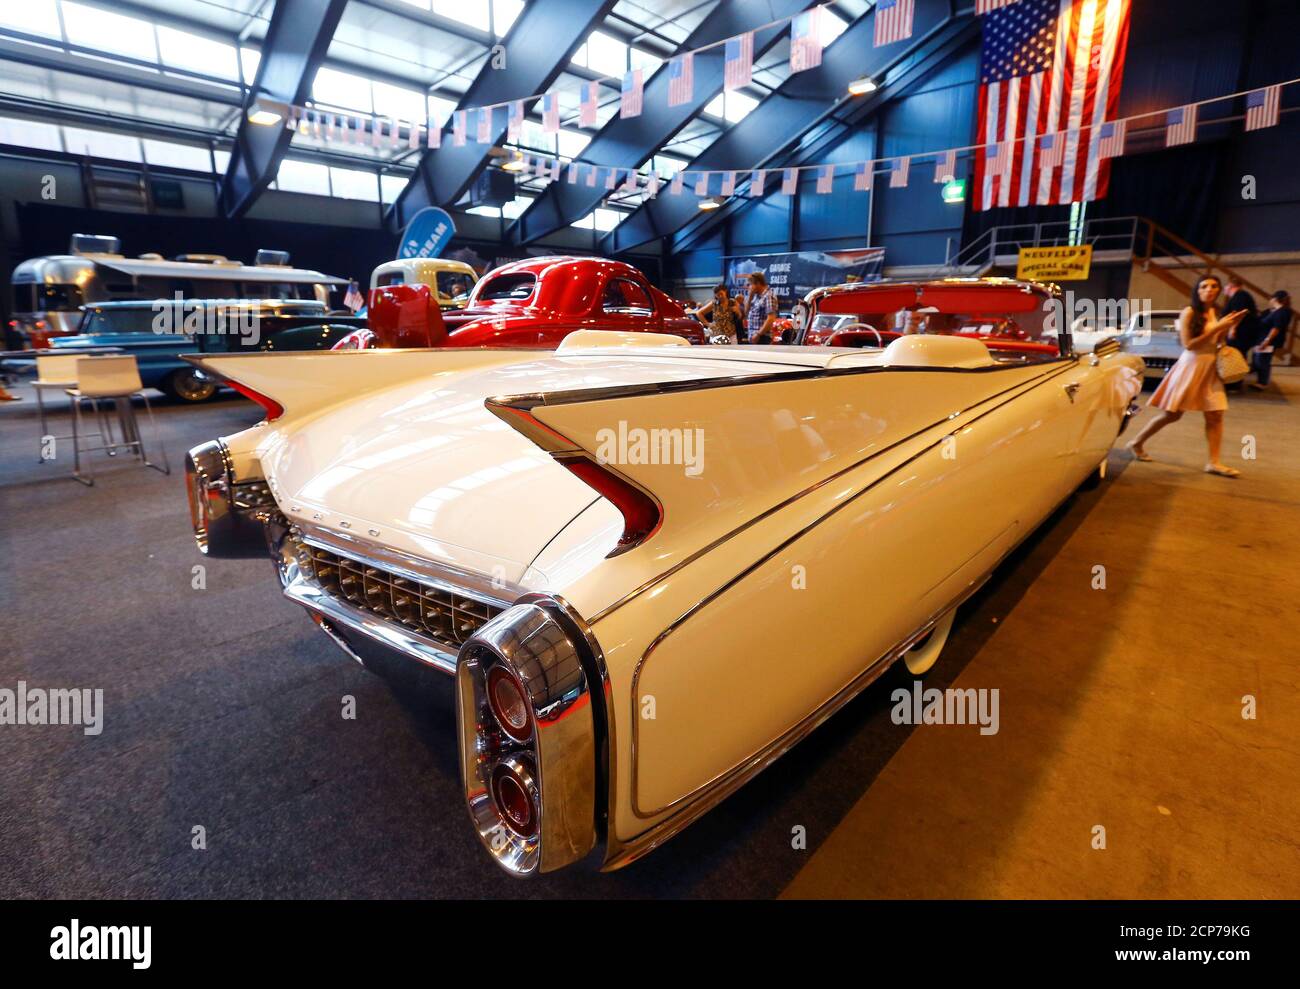 A 1960 Cadillac Eldorado Biarritz Cabriolet is offered for 185,000 Swiss  Francs (189.902 dollars) at the